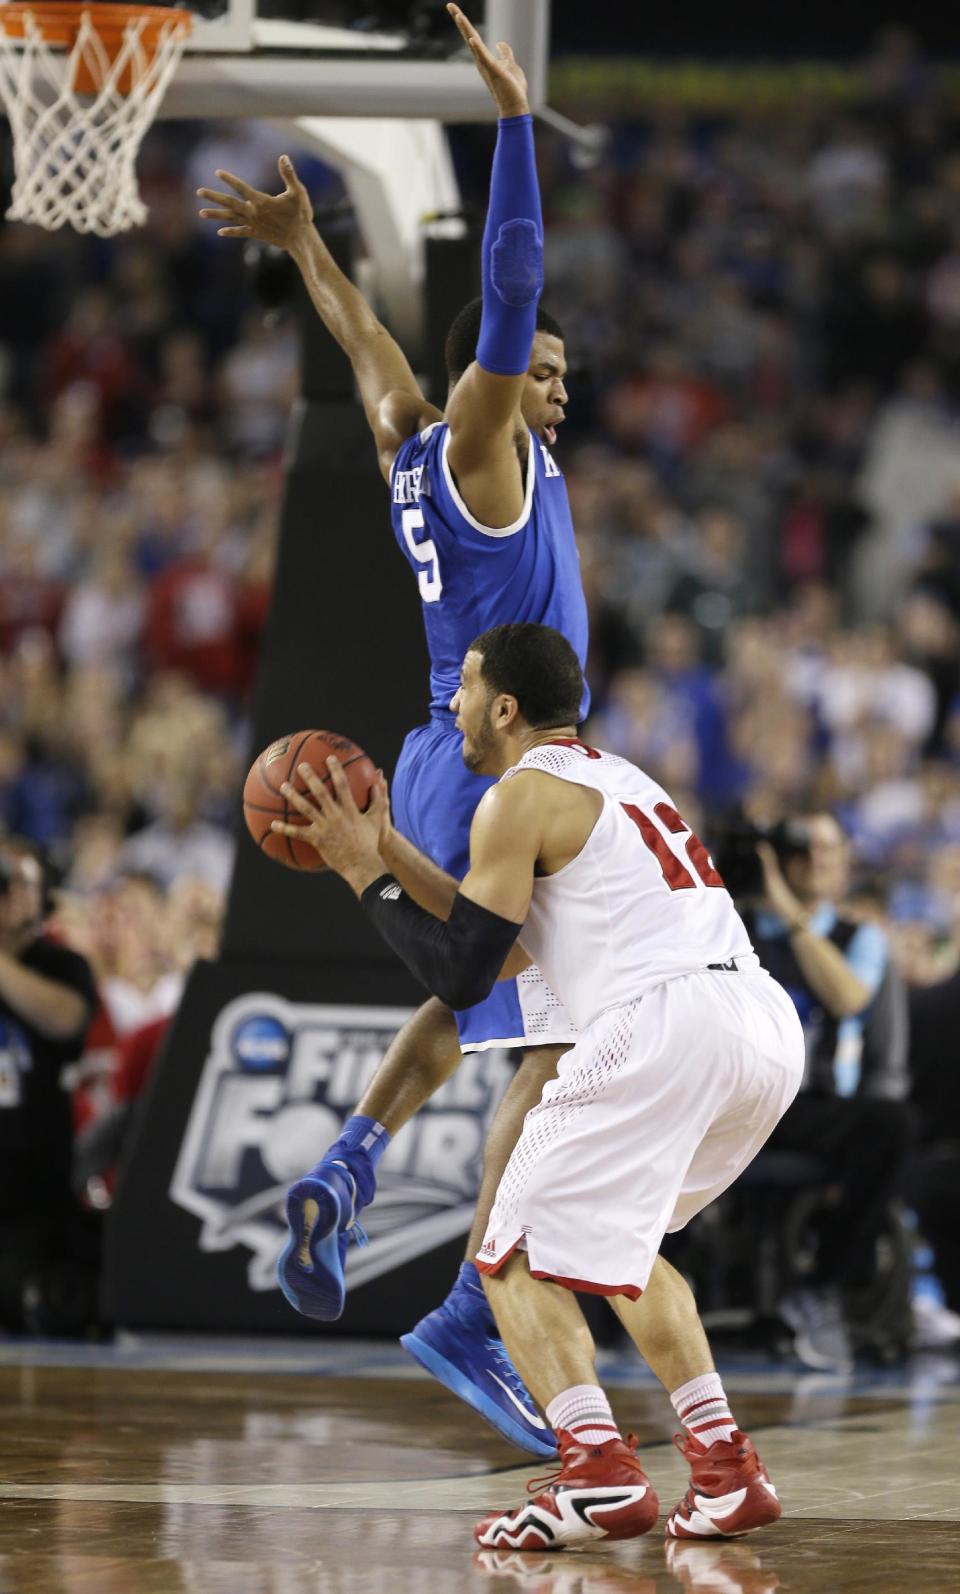 Wisconsin guard Traevon Jackson is fouled by Kentucky guard Andrew Harrison, top, while shooting a three-point basket near the end of an NCAA Final Four tournament college basketball semifinal game Saturday, April 5, 2014, in Arlington, Texas. Kentucky won 74-73. (AP Photo/Charlie Neibergall)